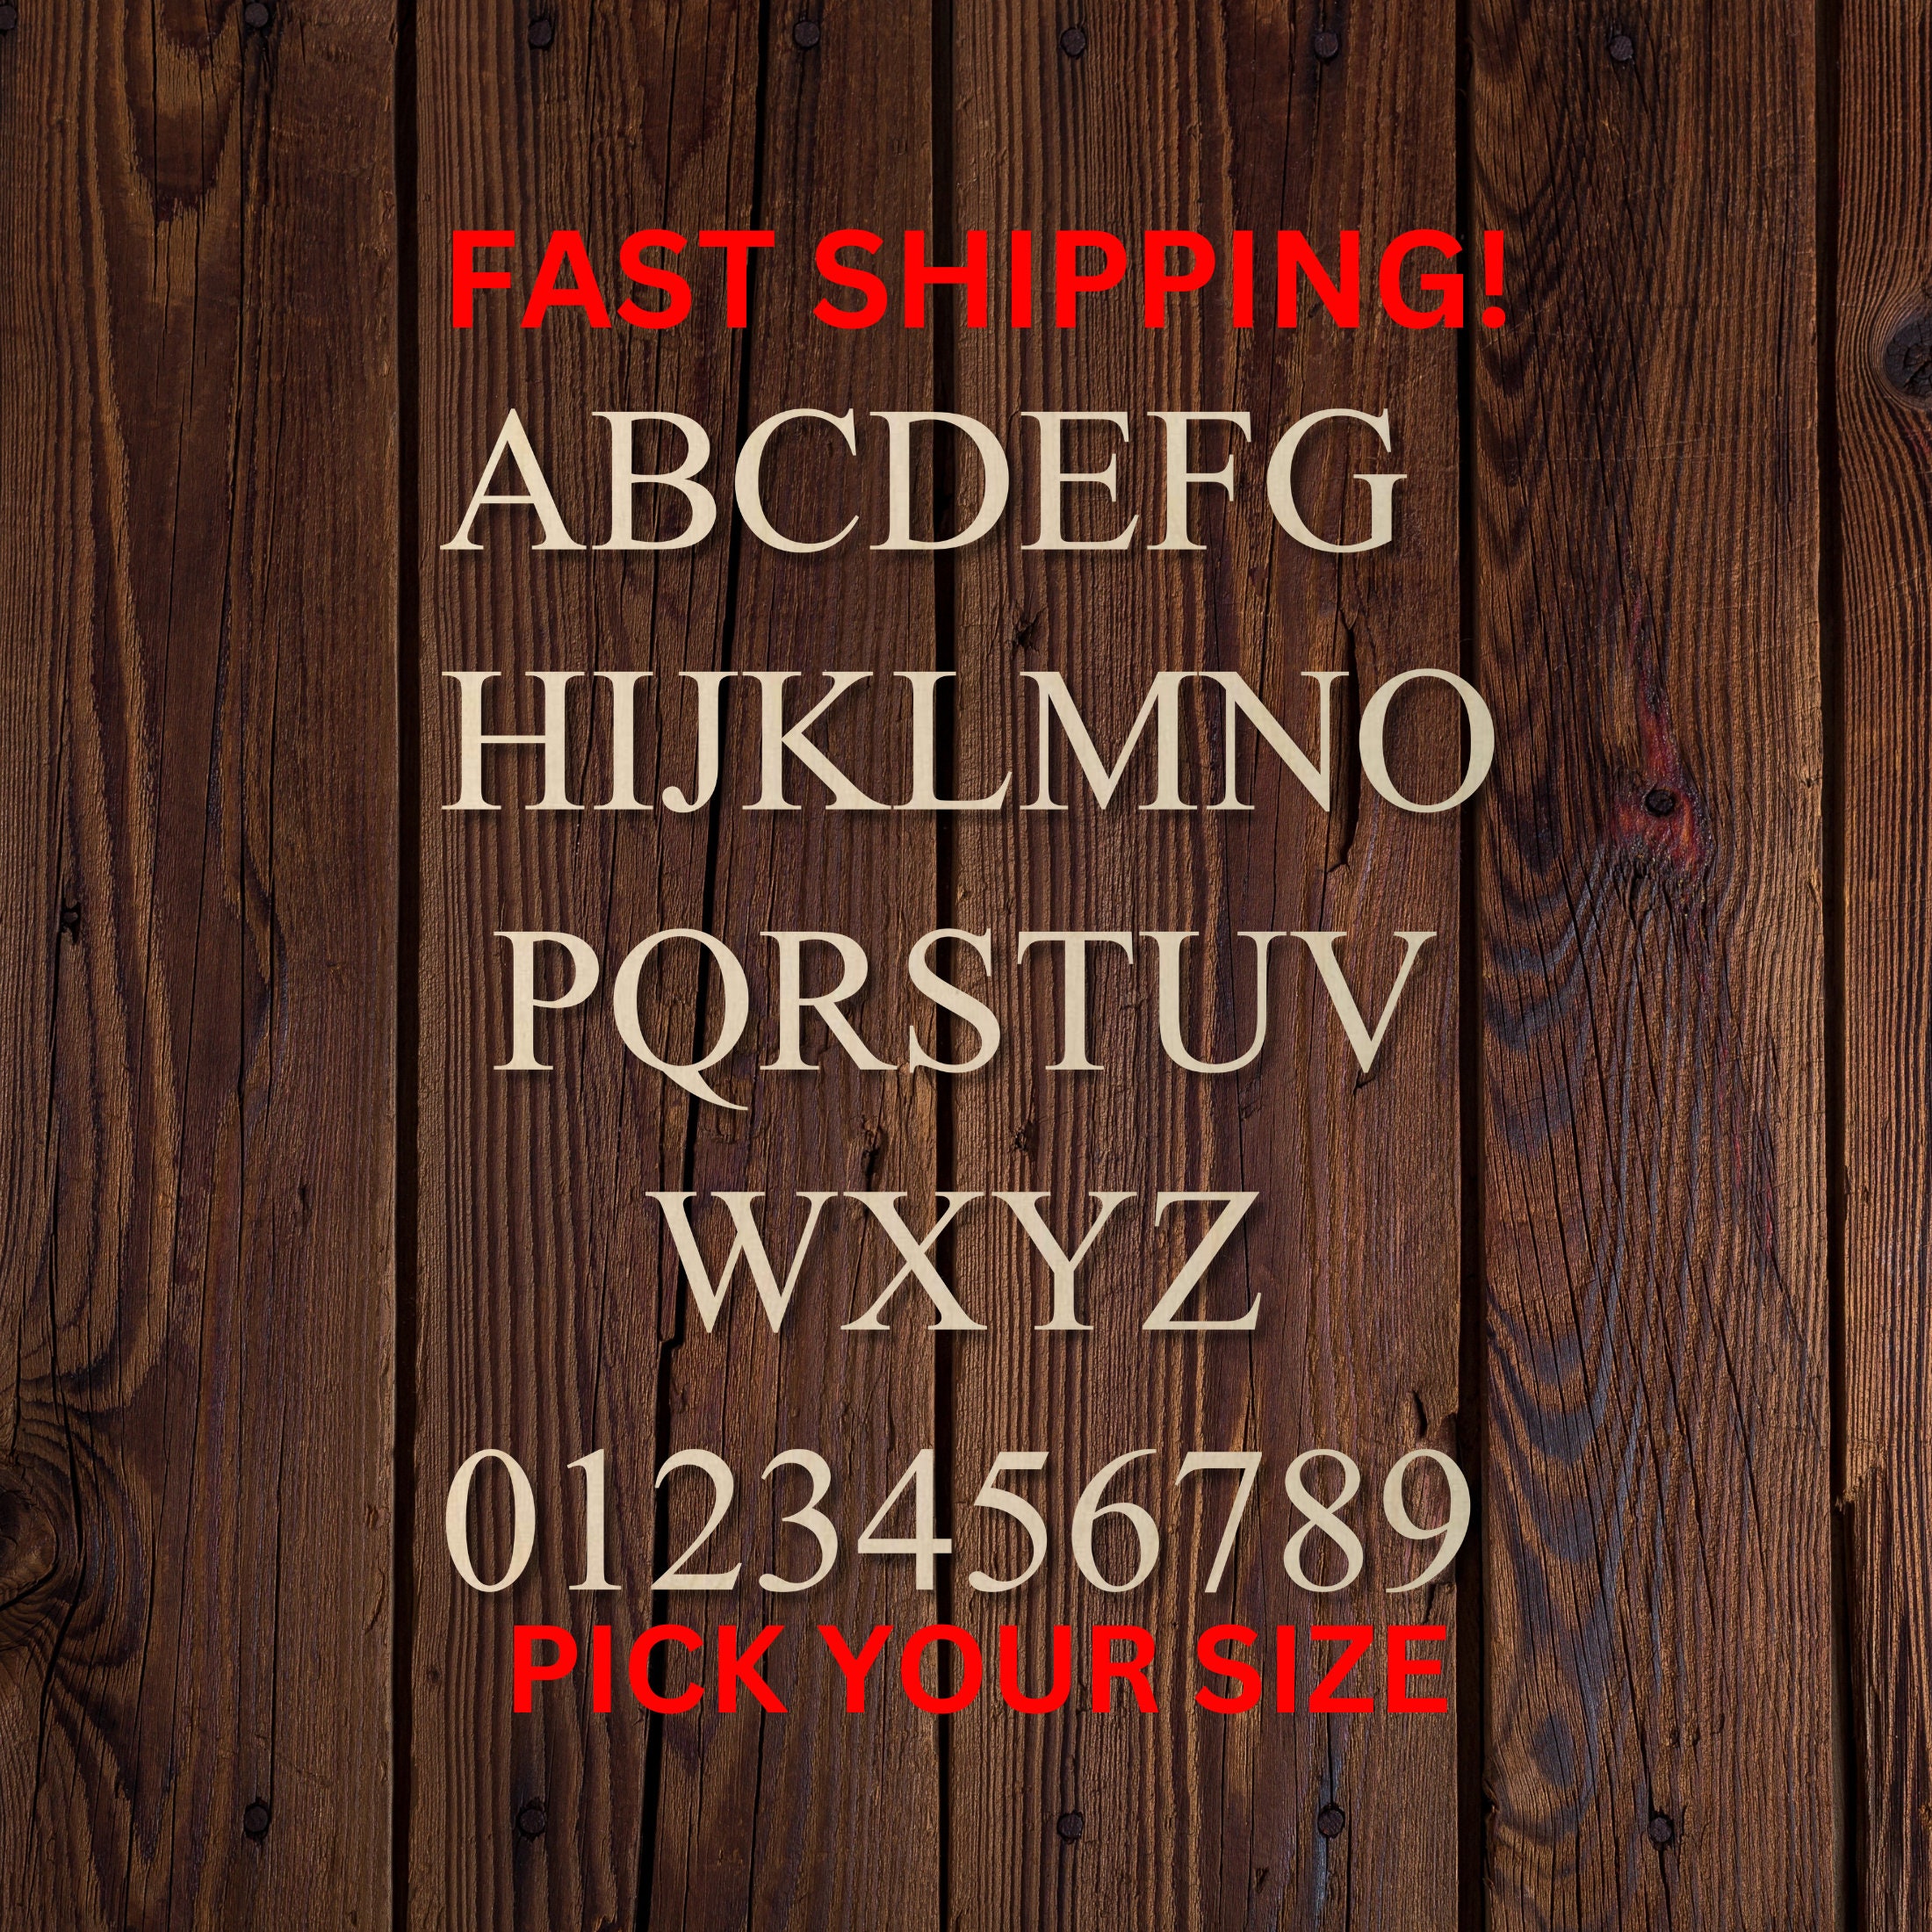 6 Old English Wooden Letter D - JoePaul's Crafts Premium MDF Wood Wall Letters (6 inch, D) 6 inch